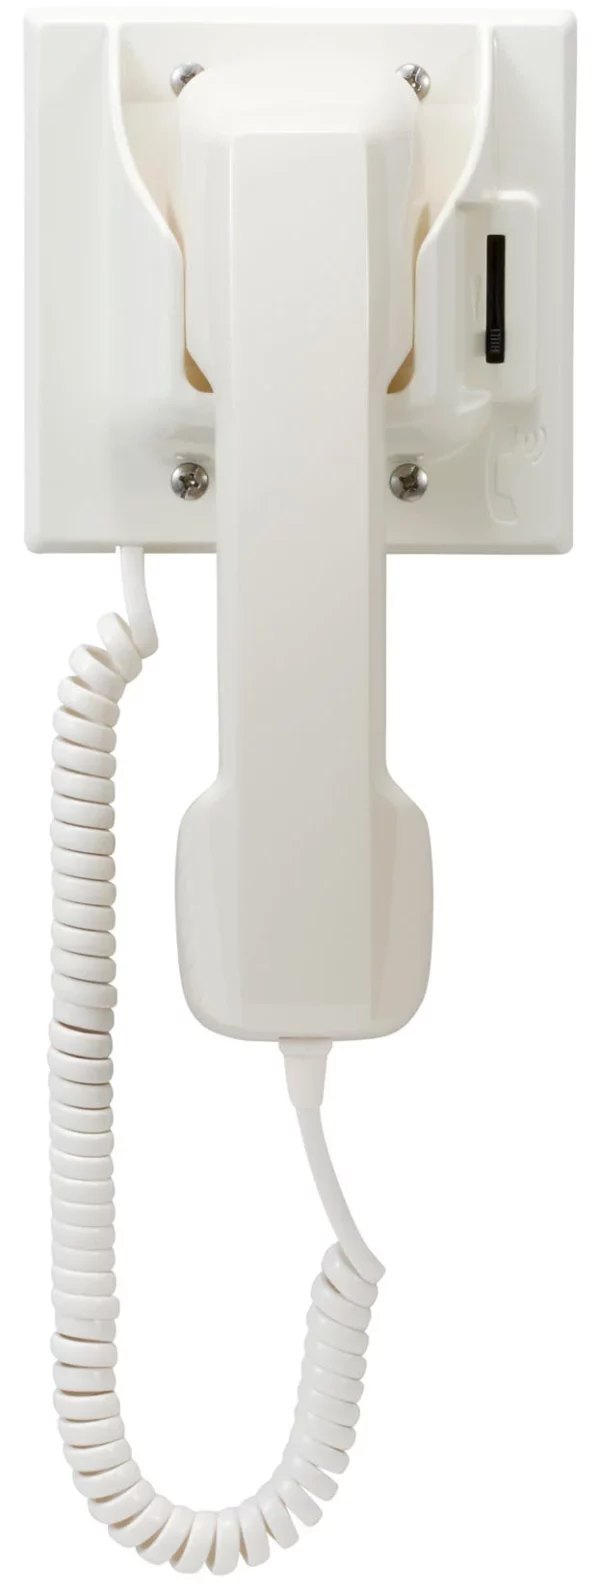 Toa Electronics Handset for N-8031MS and N-8033MS- 2 wire Master Station - TOA Electronics